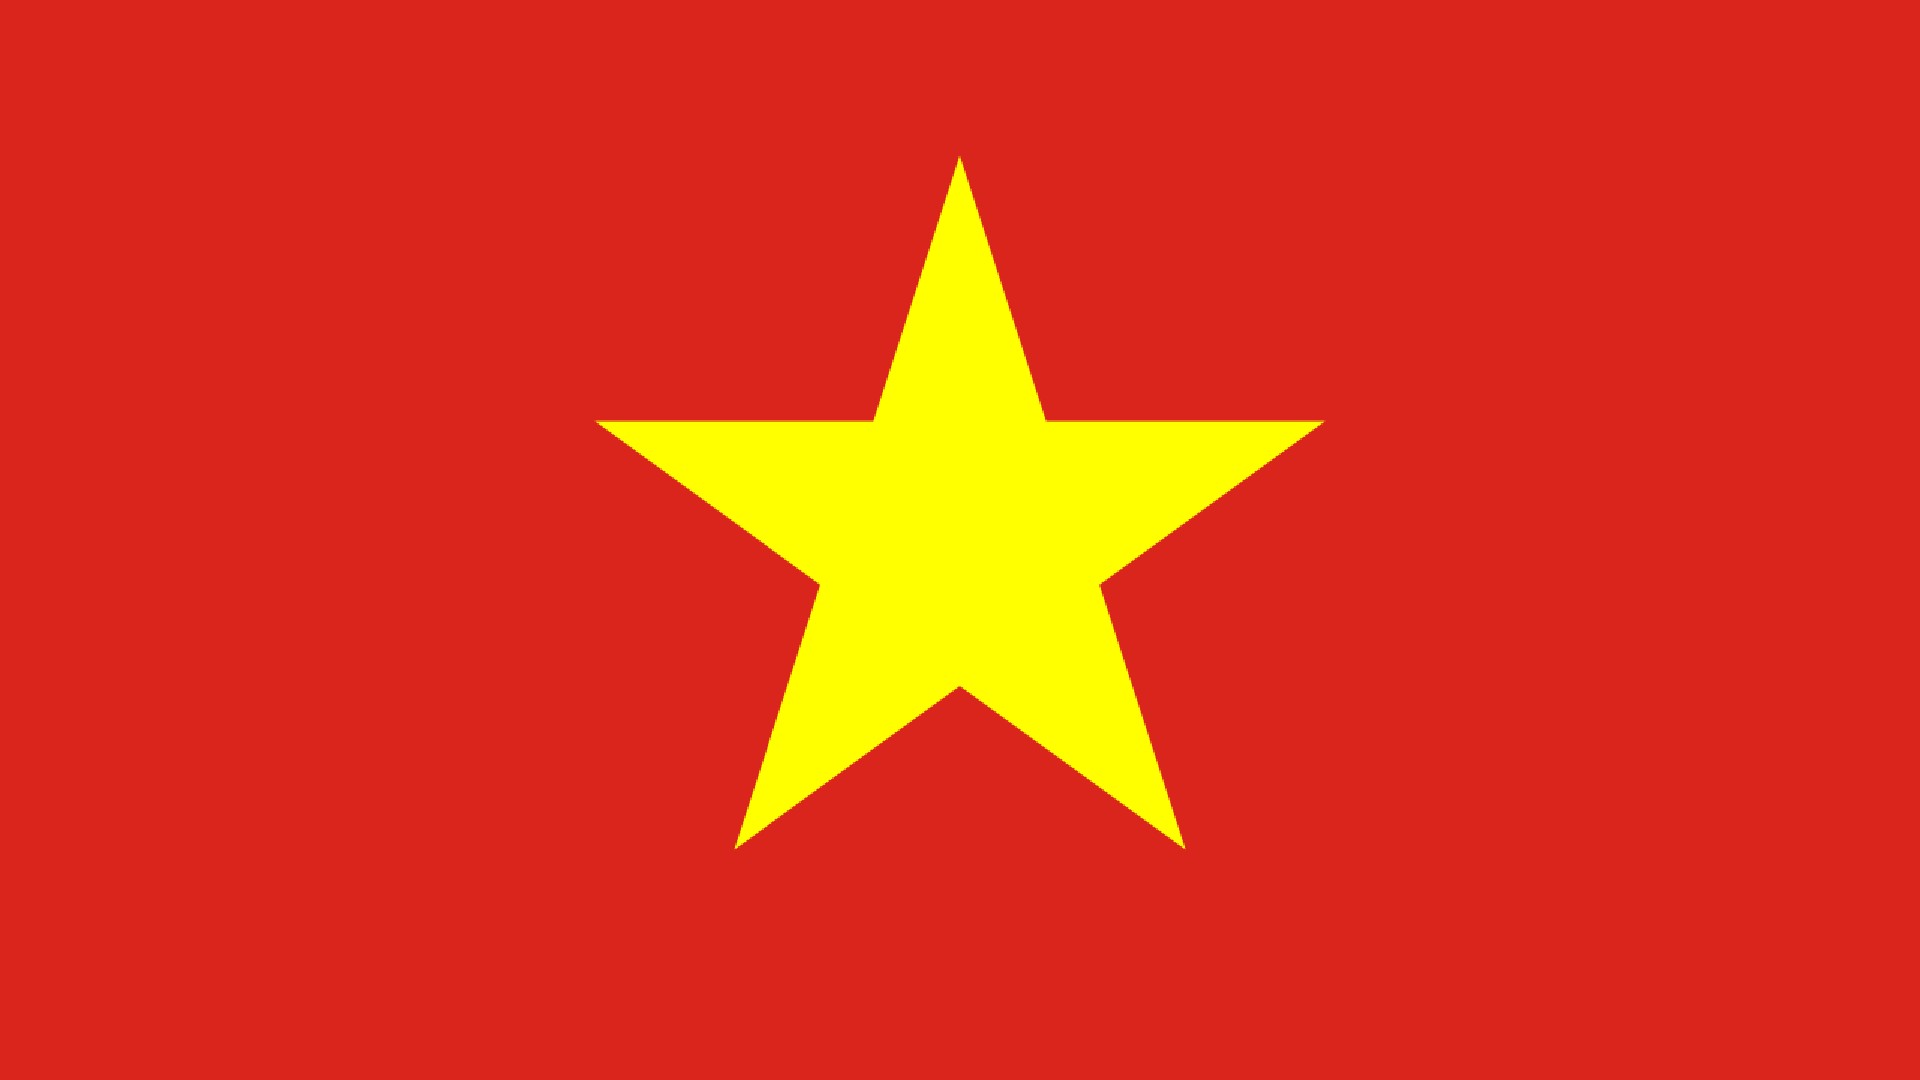 An image of the flag of Vietnam